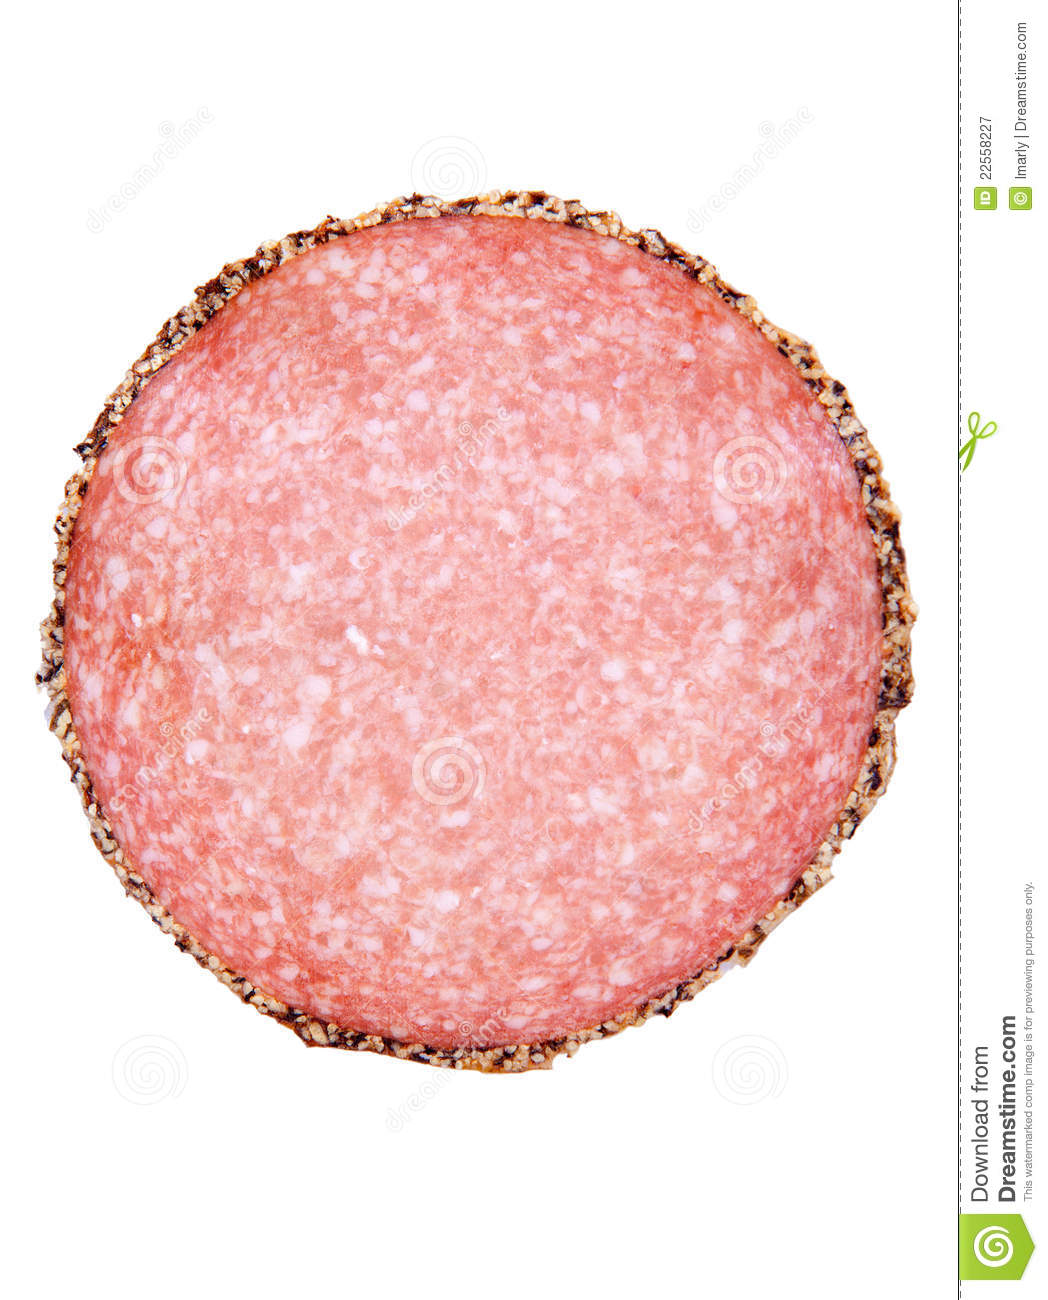 Pepper Salami Slice Royalty Free Stock Photography   Image  22558227